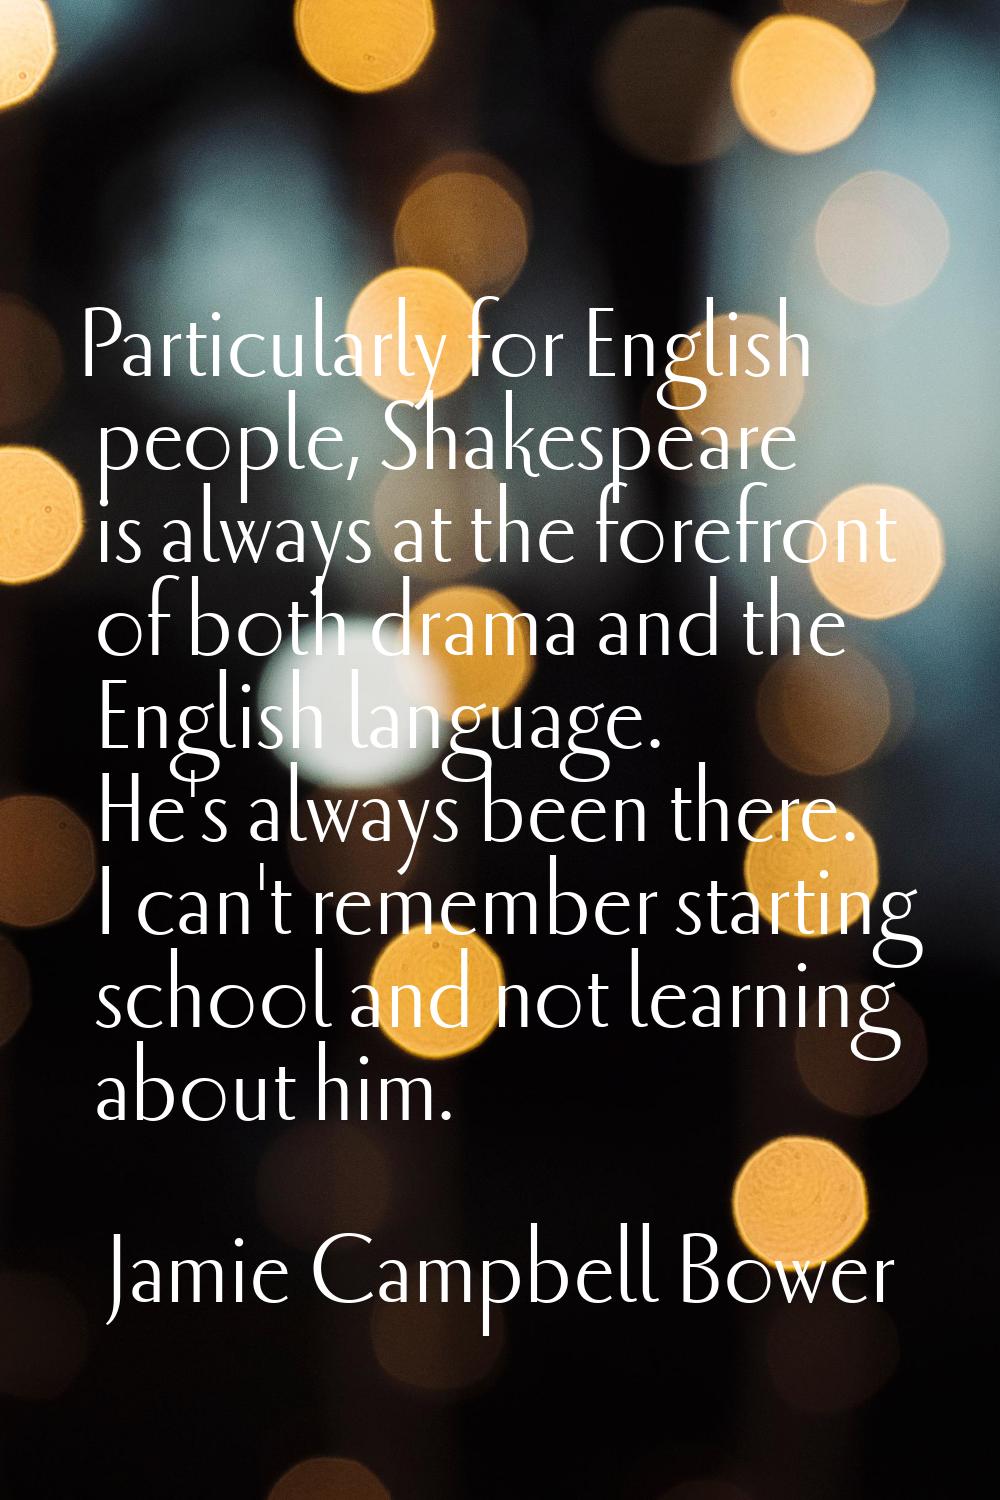 Particularly for English people, Shakespeare is always at the forefront of both drama and the Engli